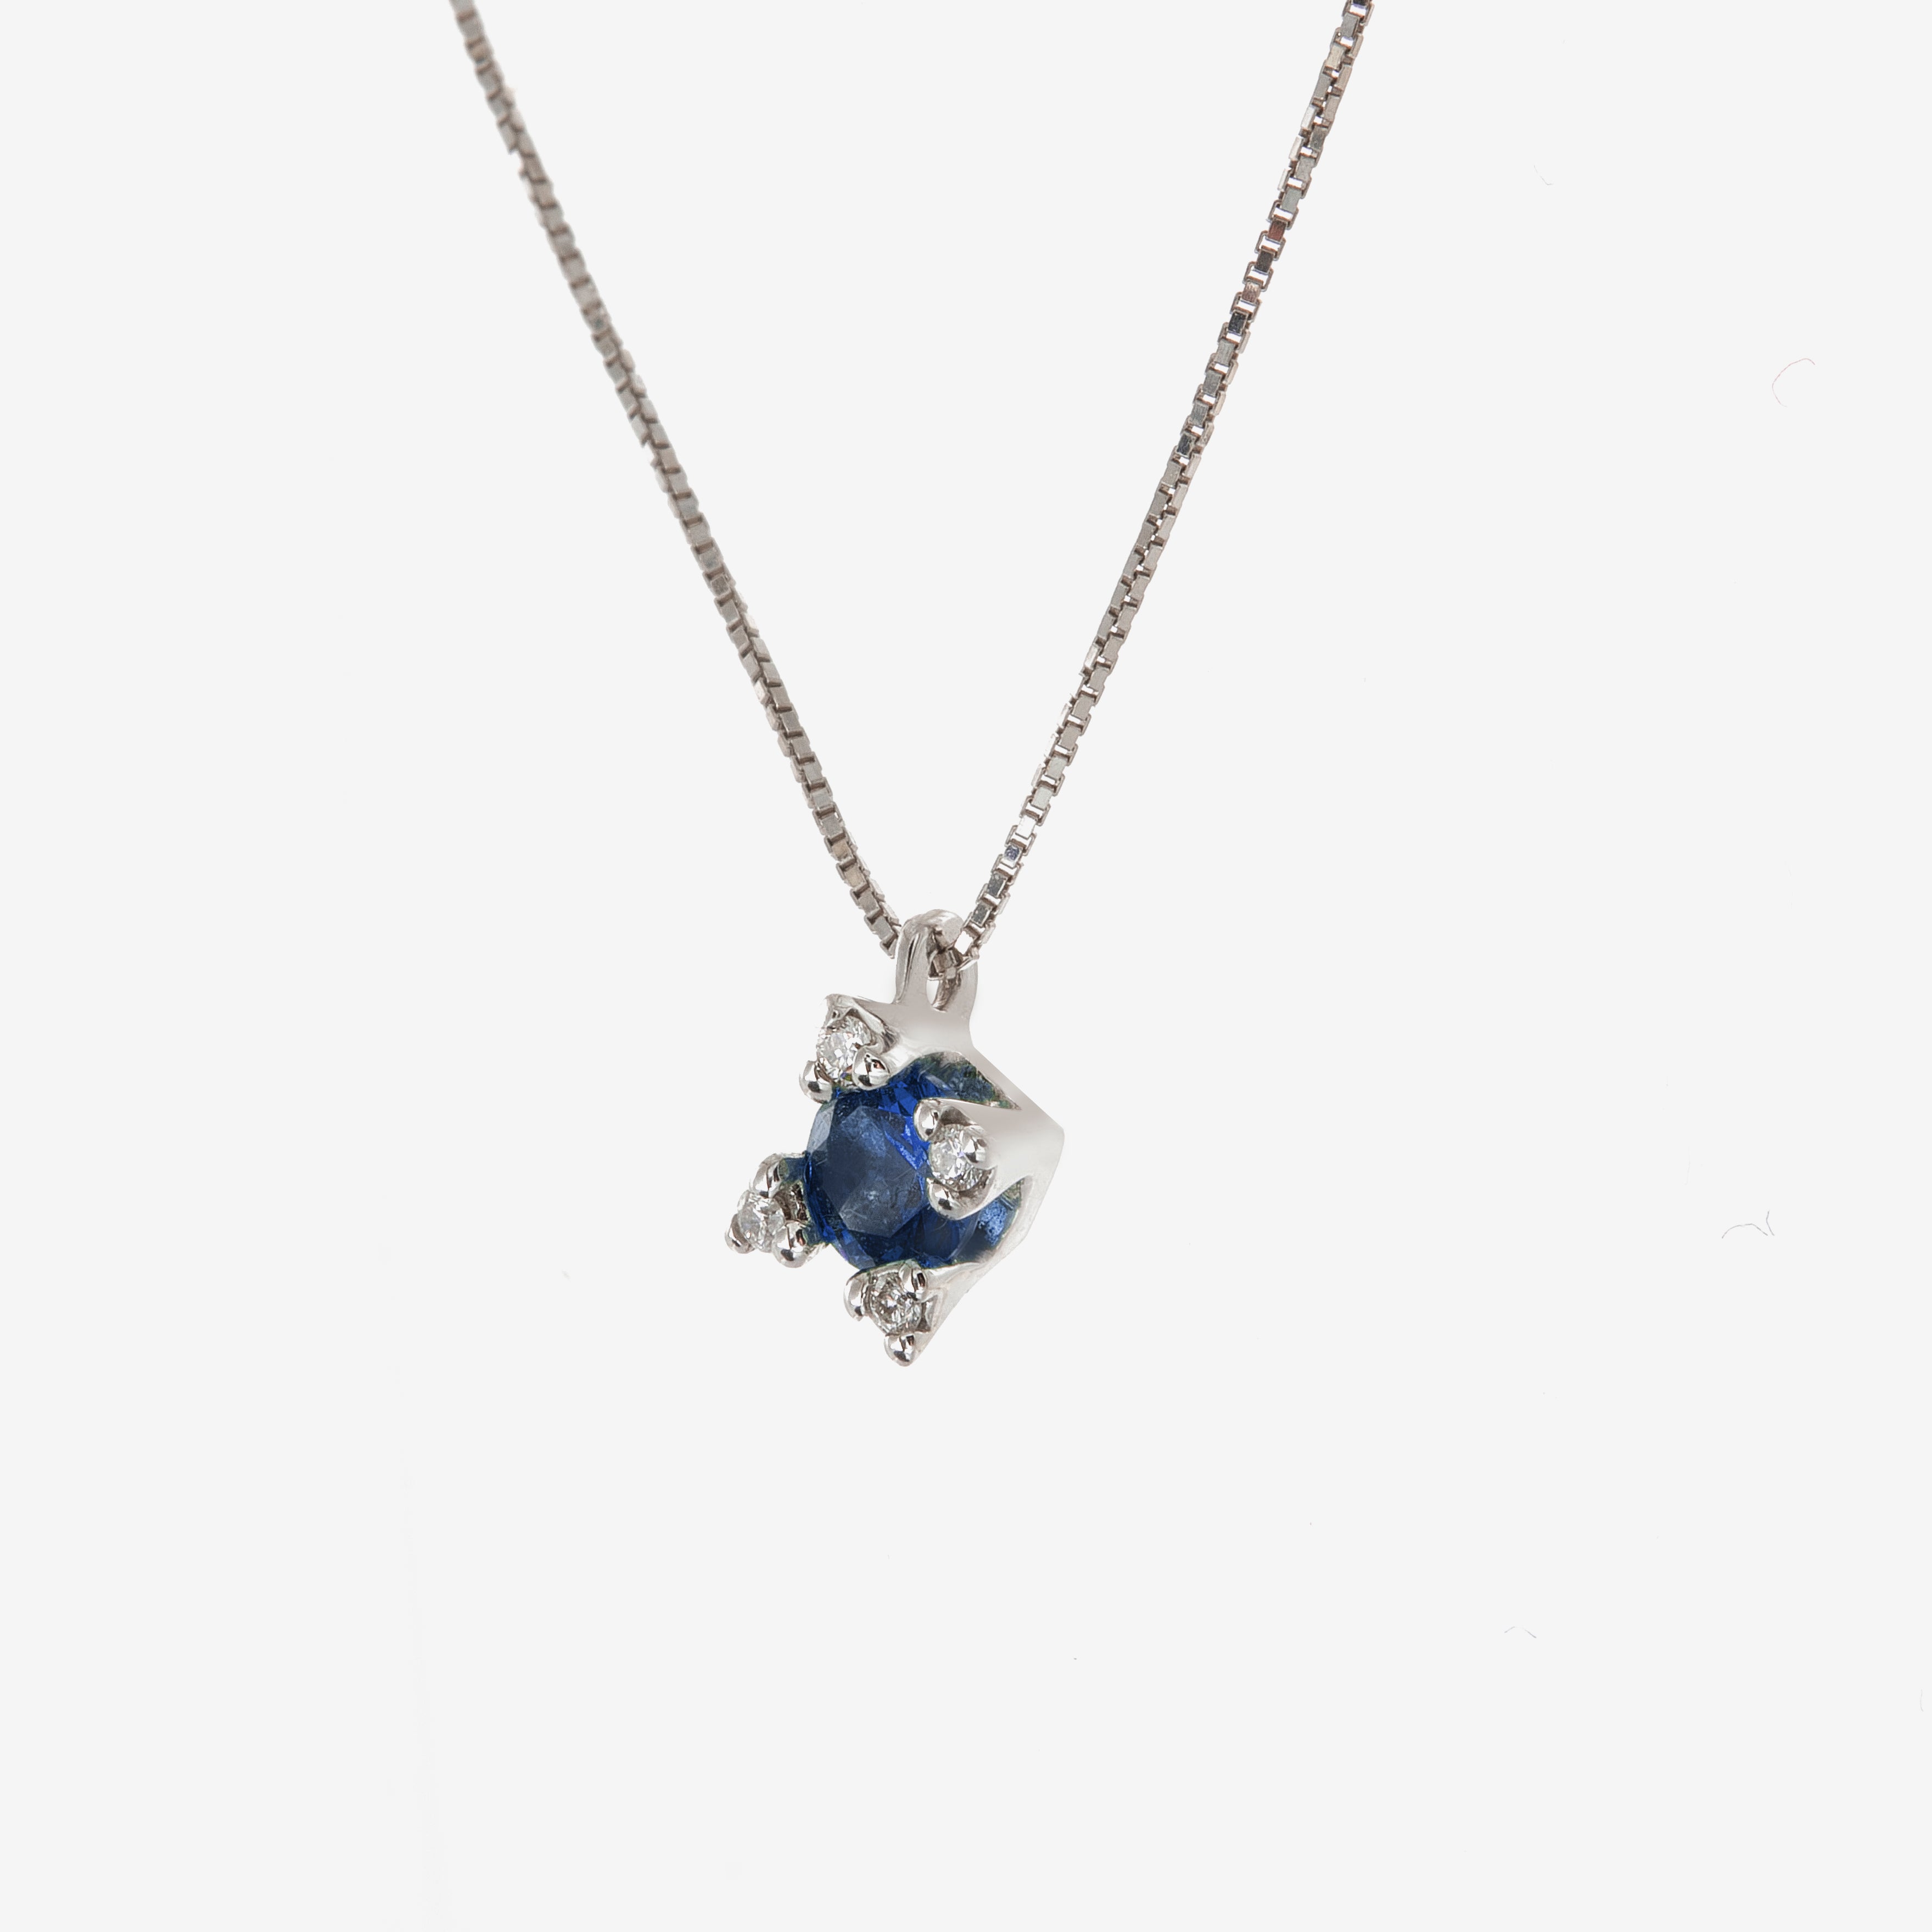 Star necklace with sapphire